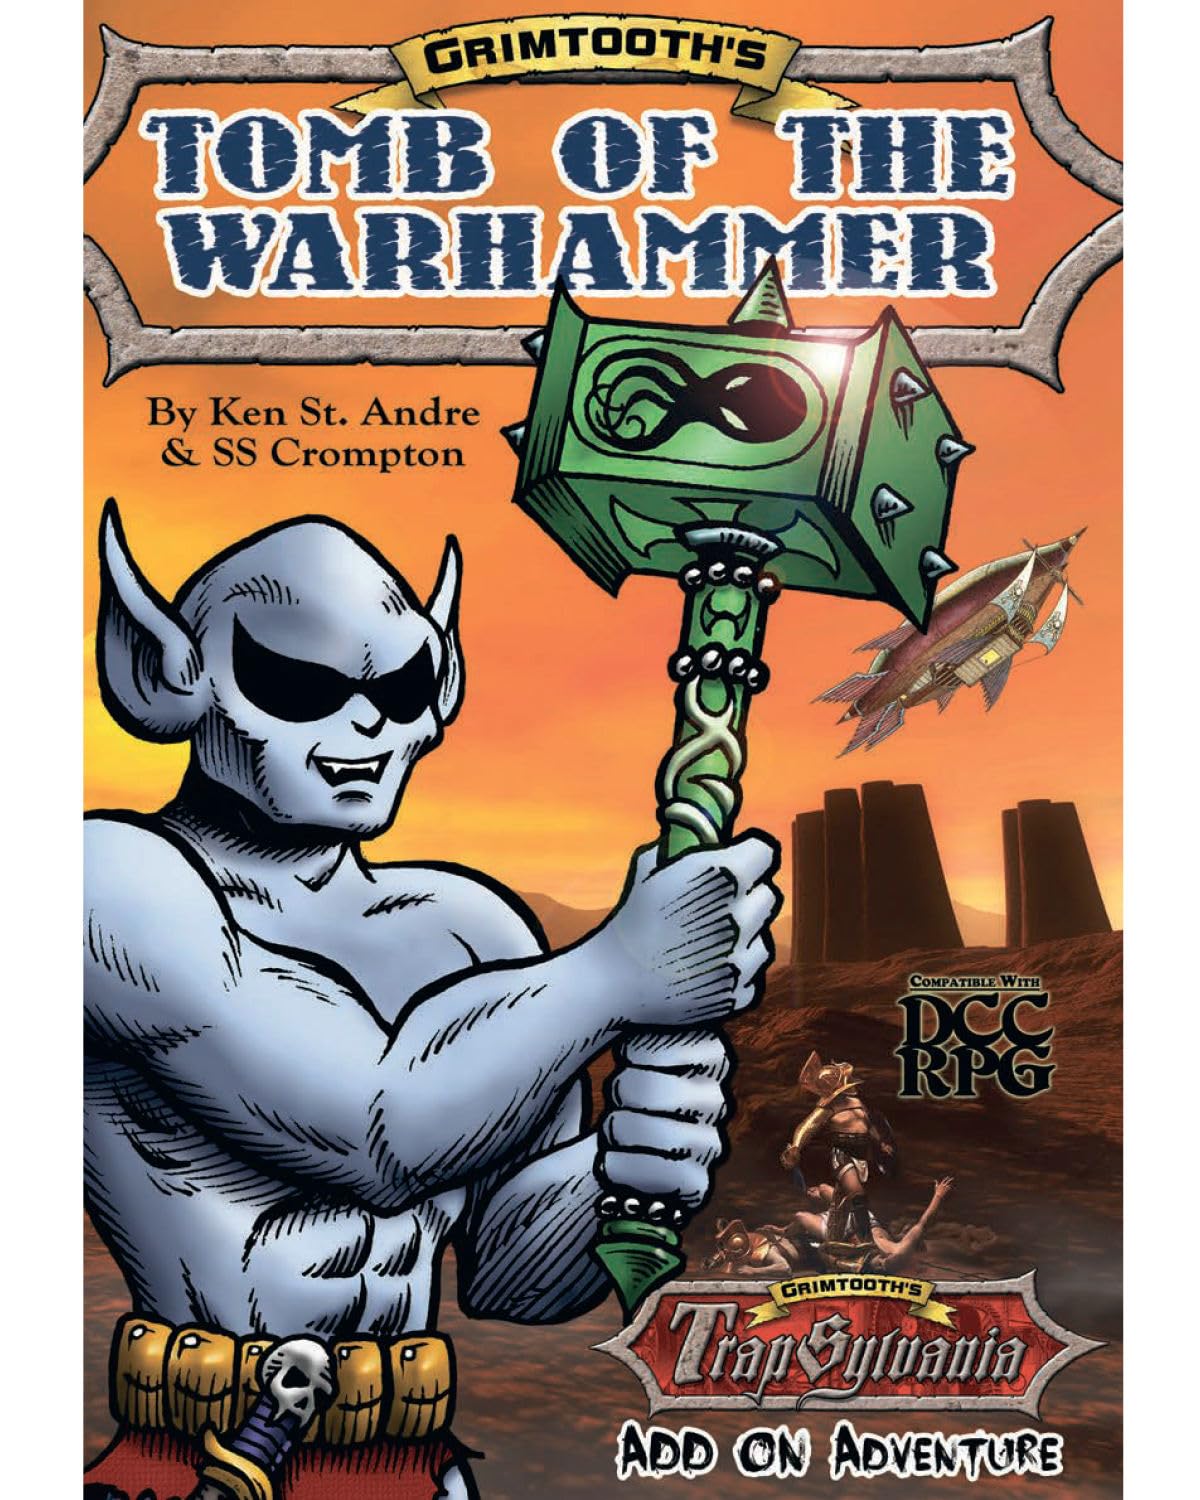 Grimtooth's Tomb of the Warhammer paperback